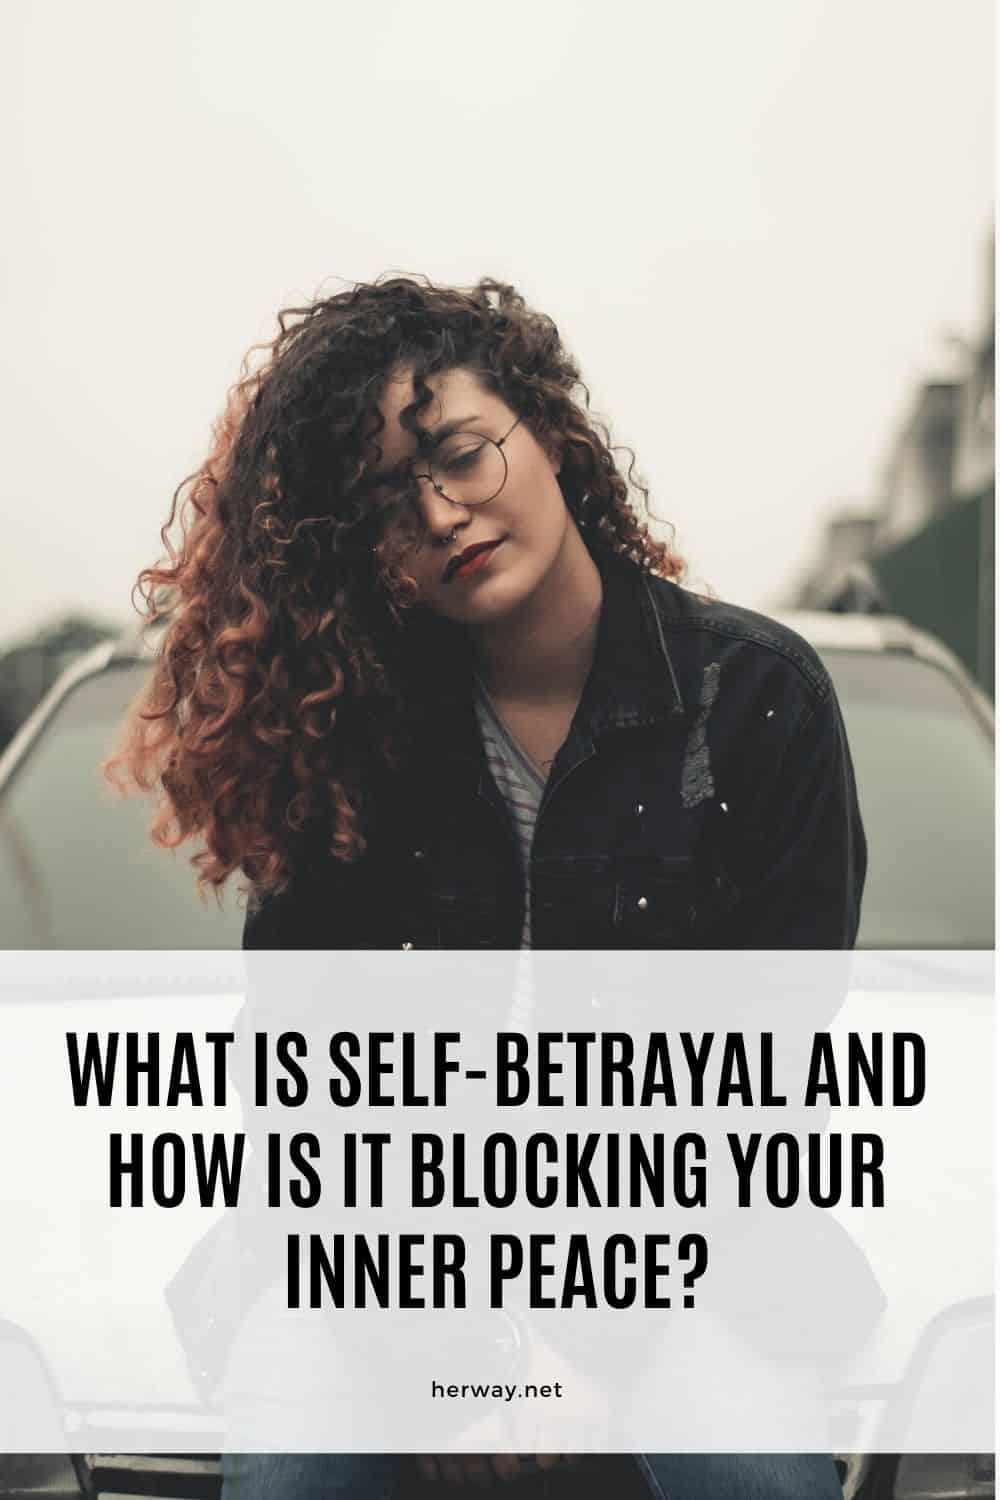 What Is Self-Betrayal And How Is It Blocking Your Inner Peace?